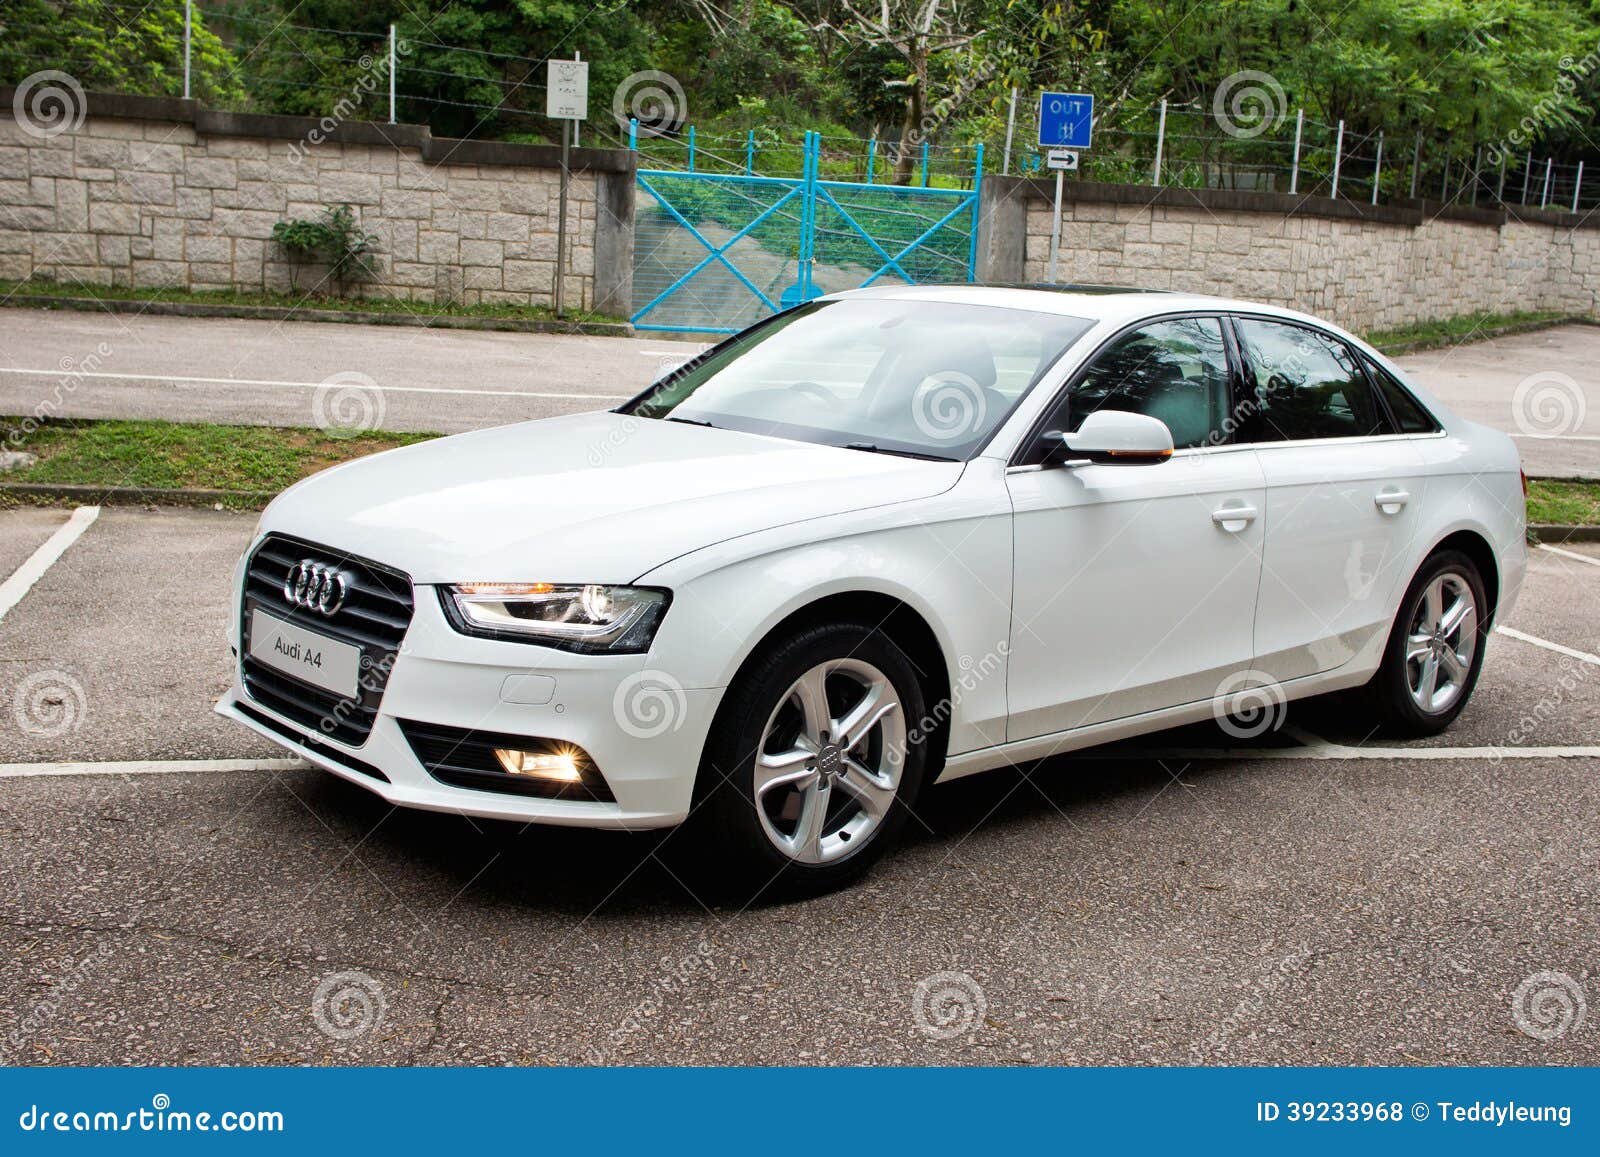 Audi A4 2012 Sedan This Is Basic Mode No Extra Option Stock Photo  Picture And Royalty Free Image Image 27000032